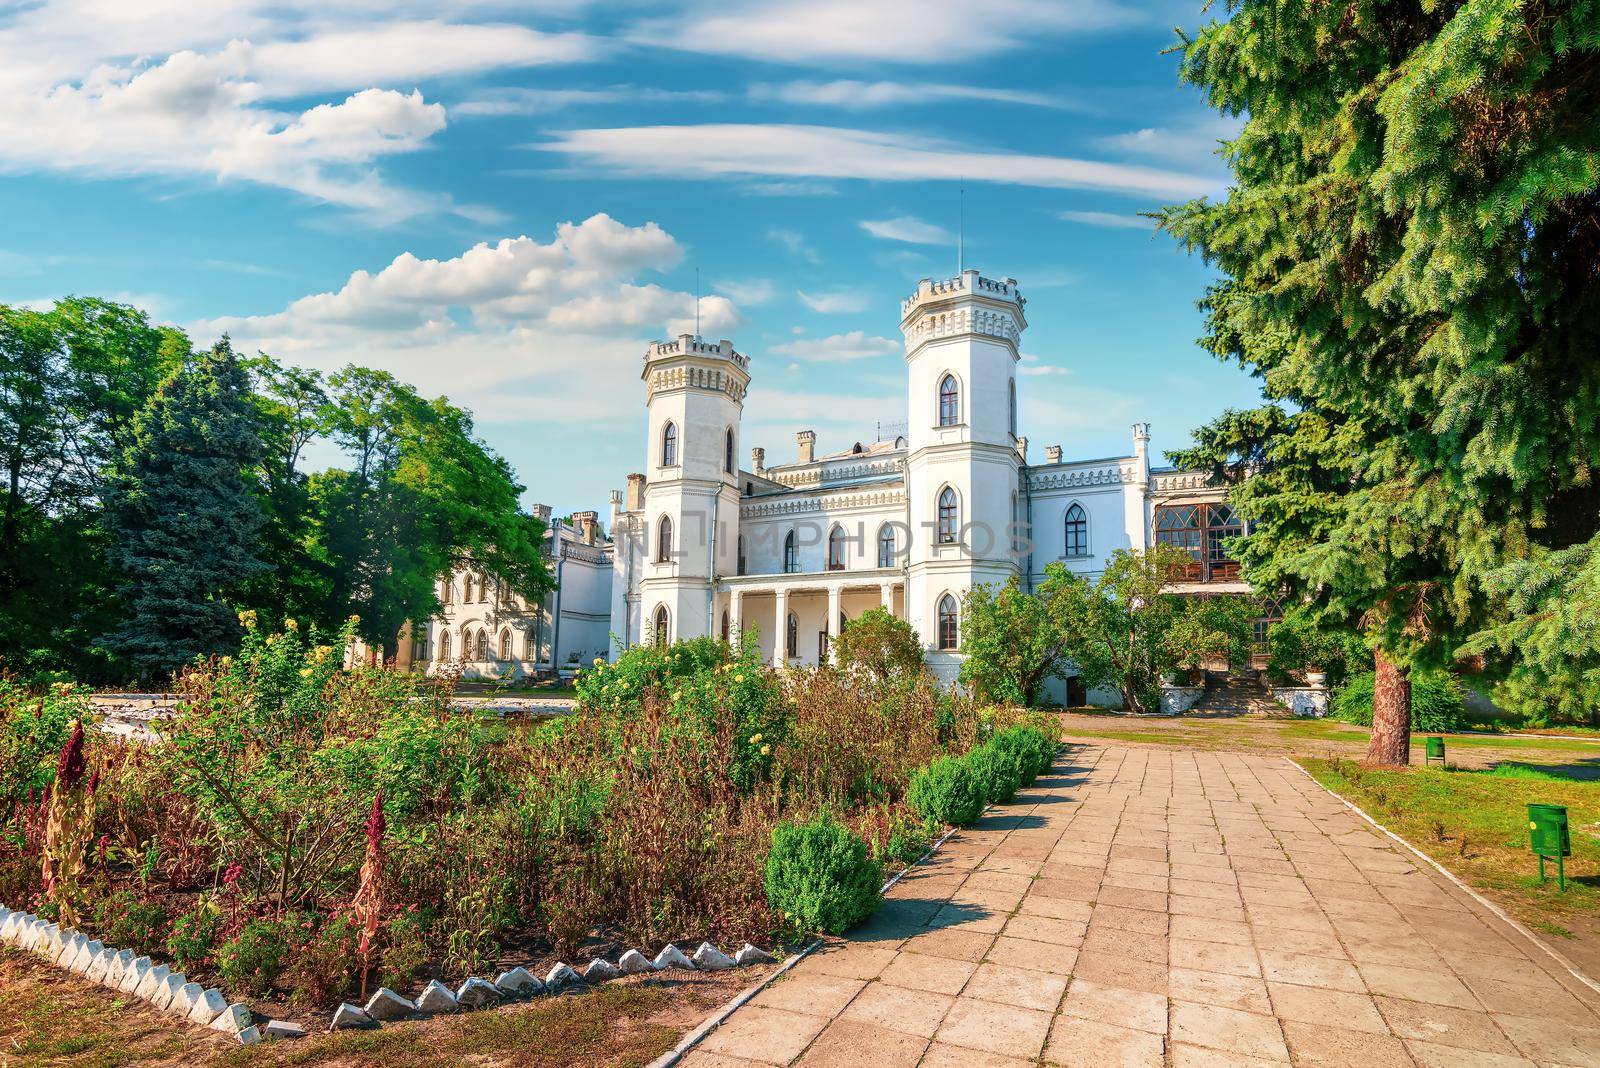 Beautiful view of Sharovsky Castle building in amazing green park